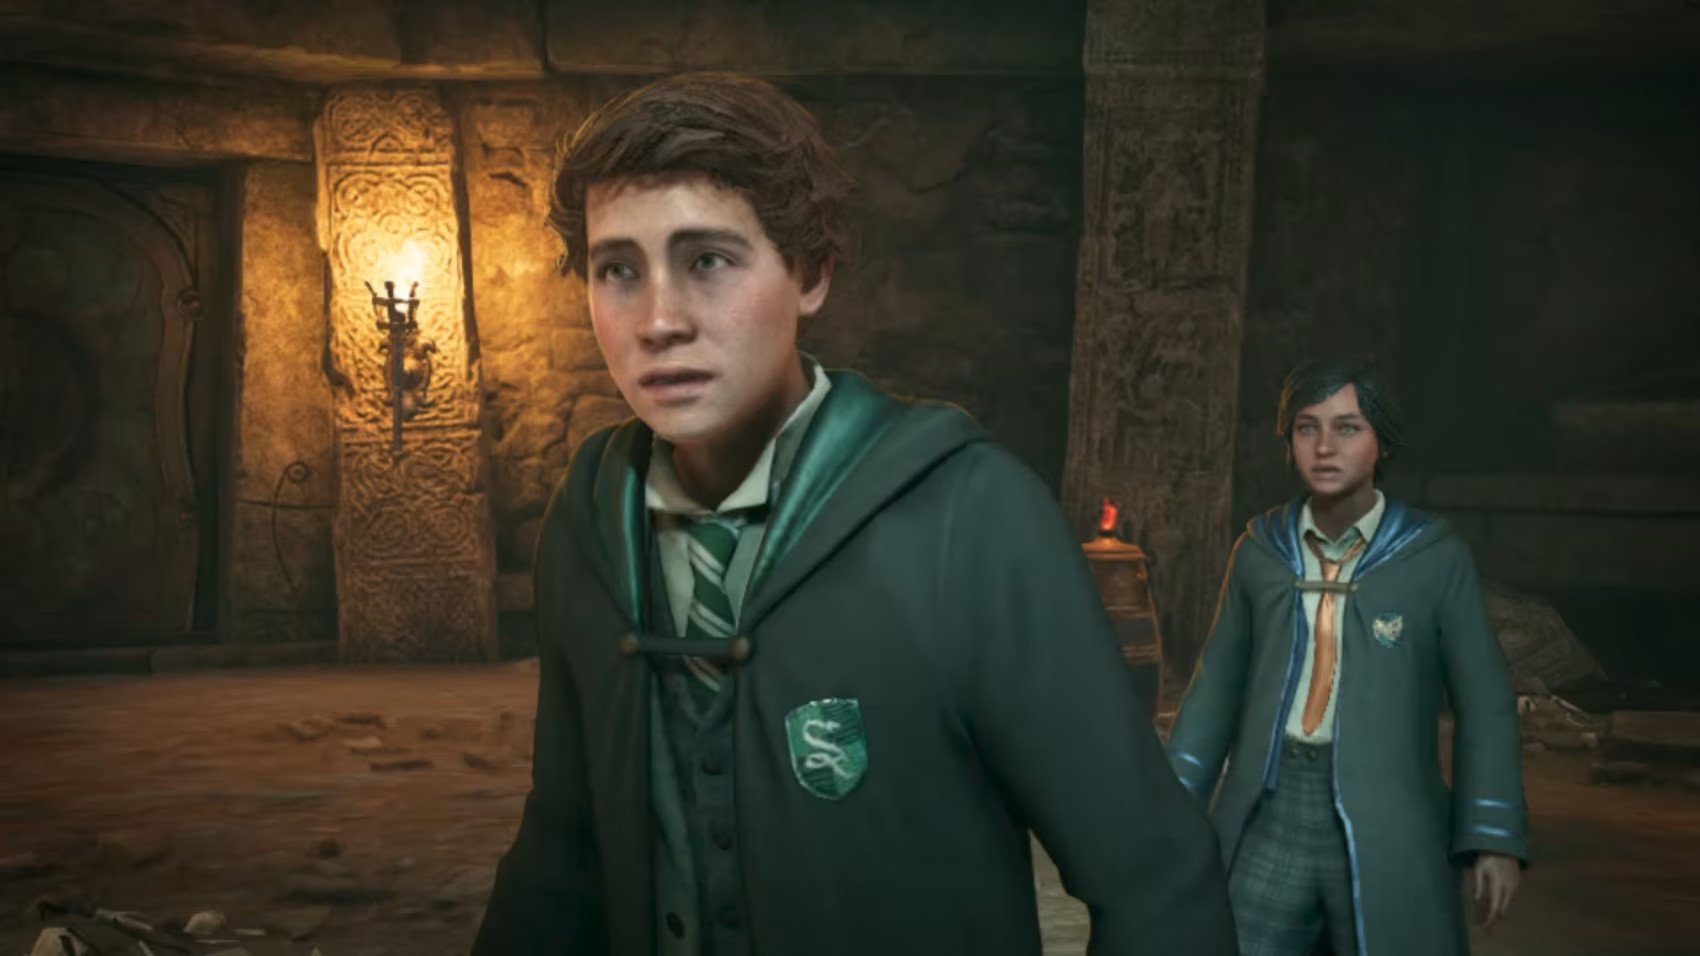 Hogwarts Legacy PS4 Release Time - Silent PC Review